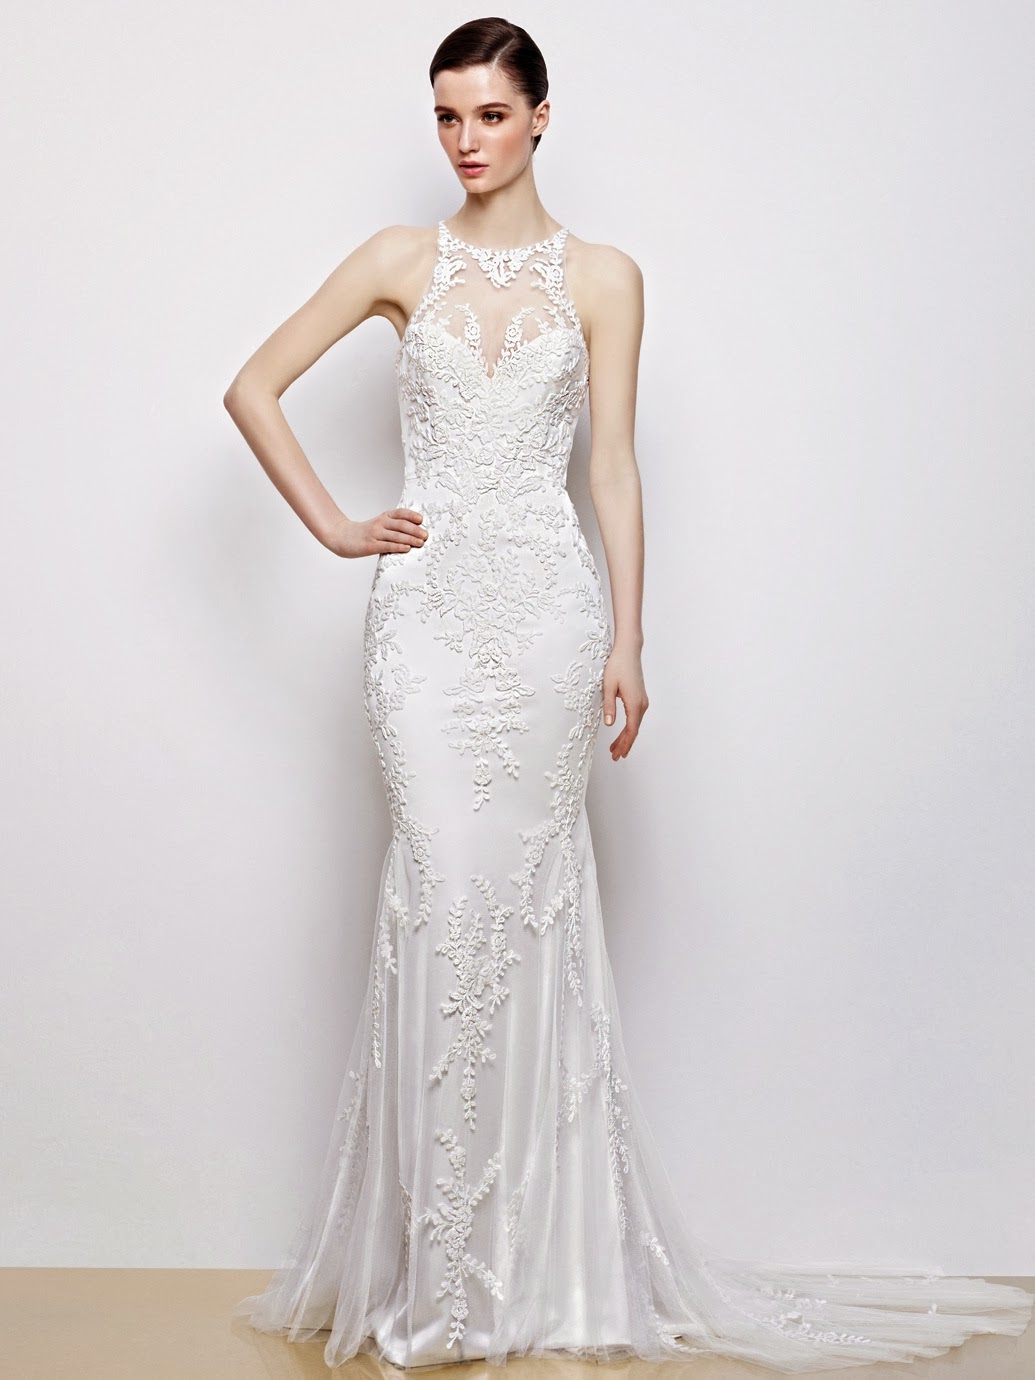 Enzoani Spring 2014 Bridal Collection